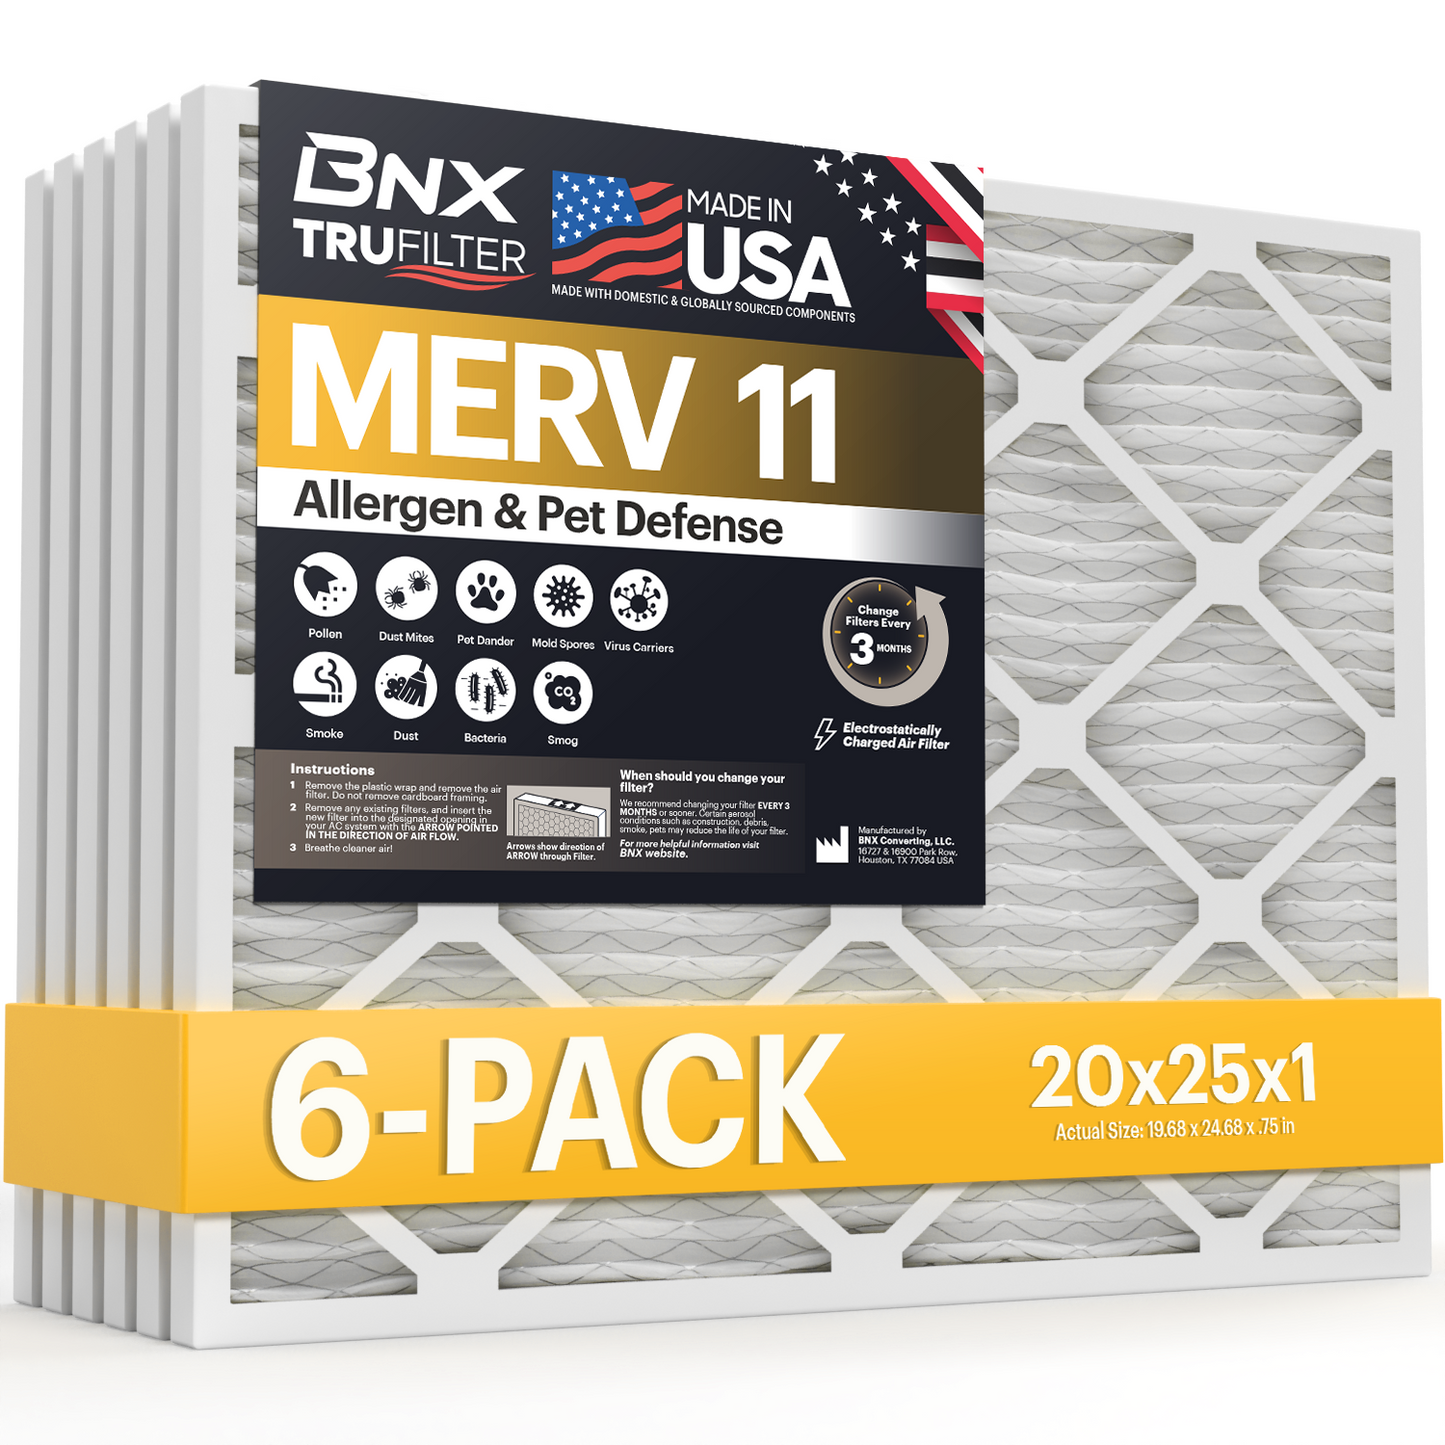 BNX TruFilter 20x25x1 Air Filter MERV 11 (6-Pack) - MADE IN USA - Allergen Defense Electrostatic Pleated Air Conditioner HVAC AC Furnace Filters for Allergies, Dust, Pet, Smoke, Allergy MPR 1200 FPR 7